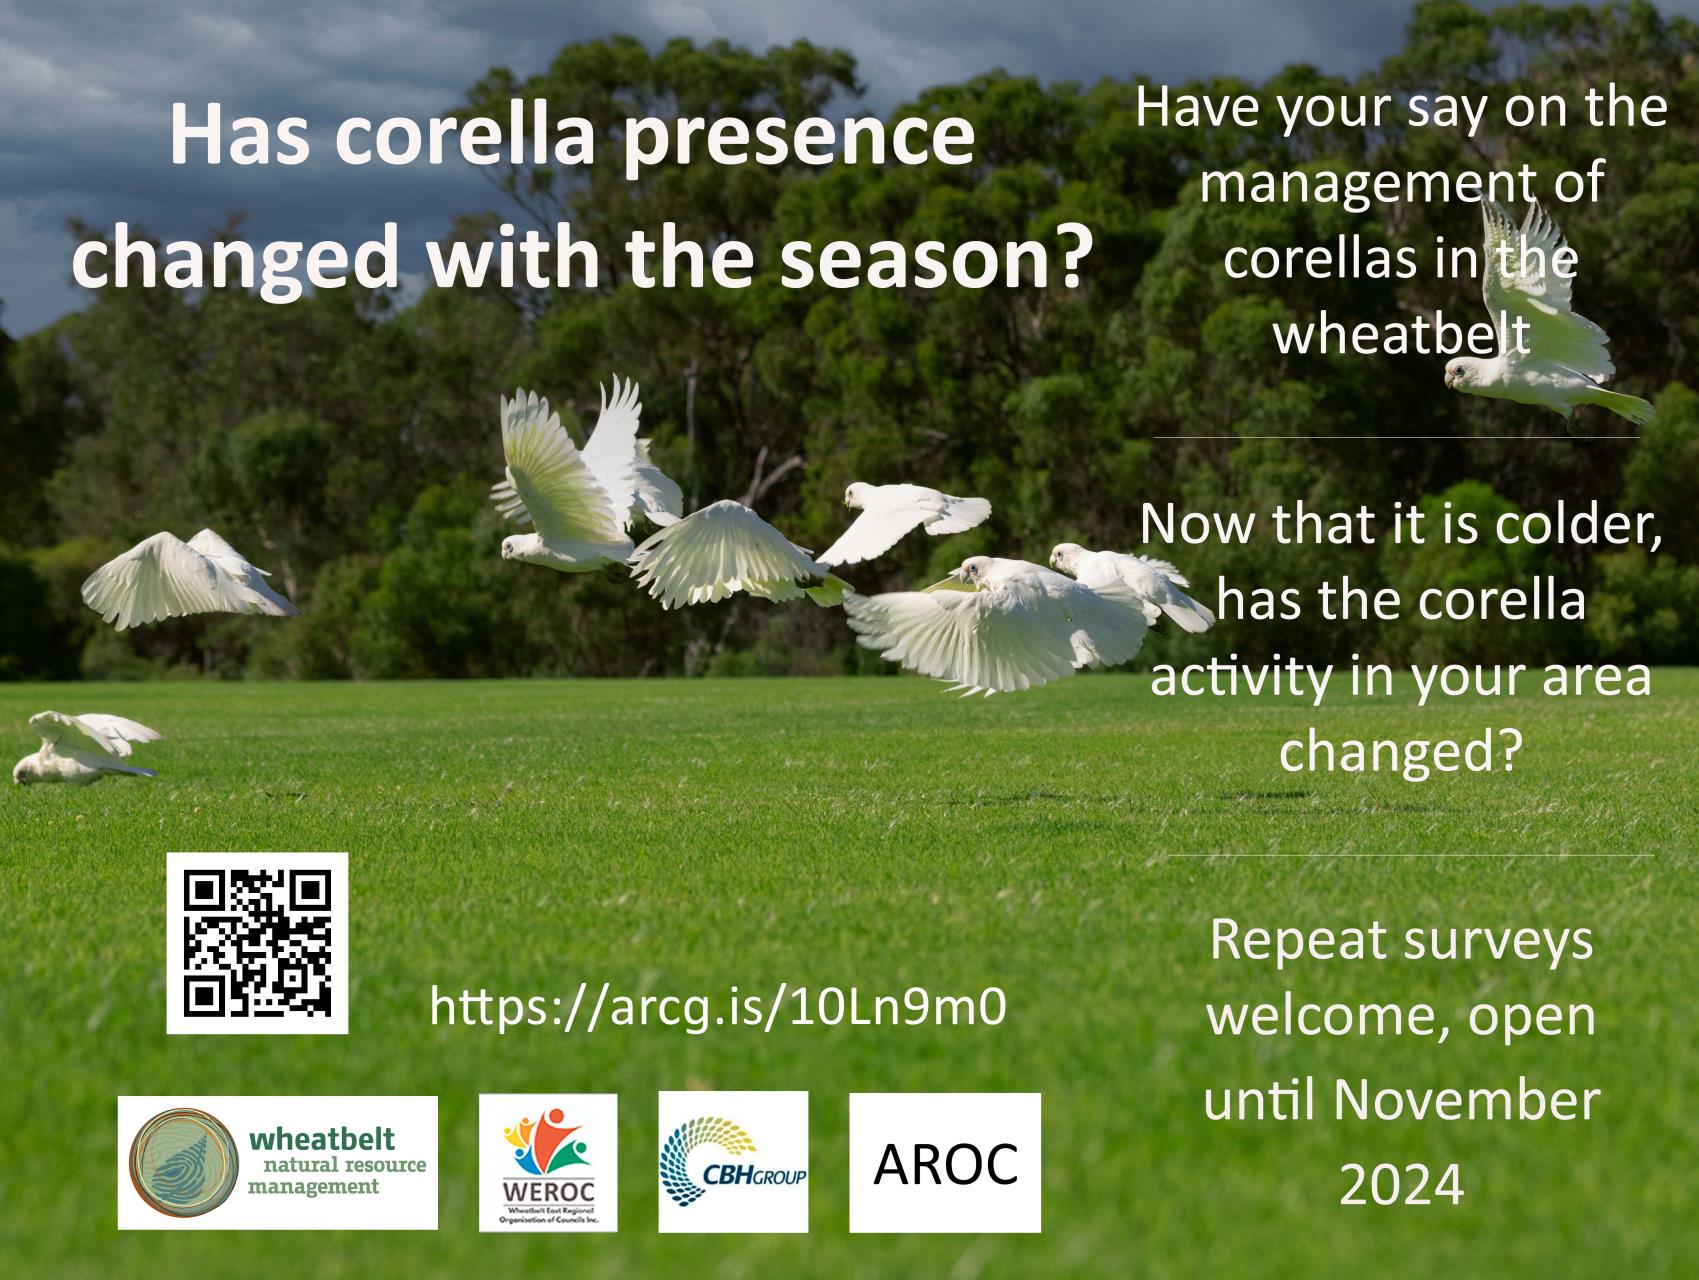 Help Manage the Growing Corella Population: Share Your Sightings and Impact